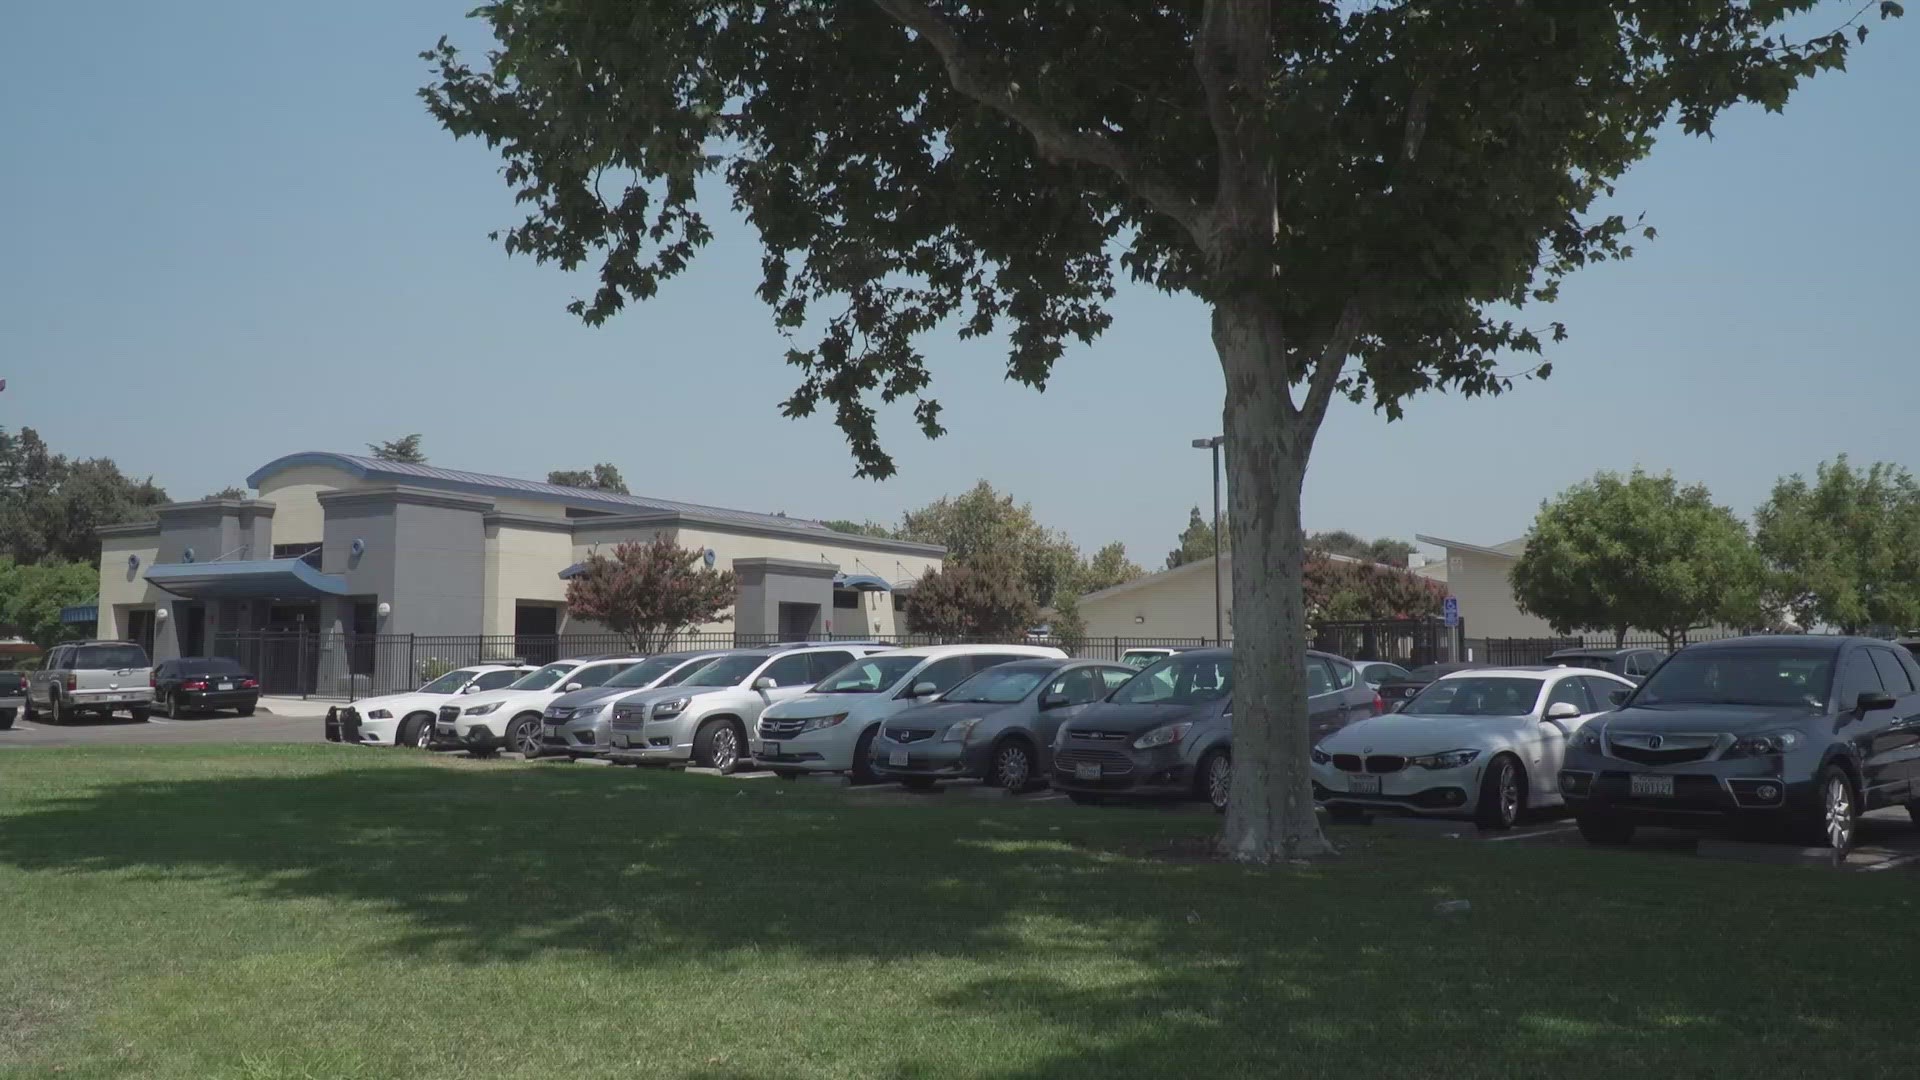 Stockton parents call for teacher to be fired after racial slur was allegedly found